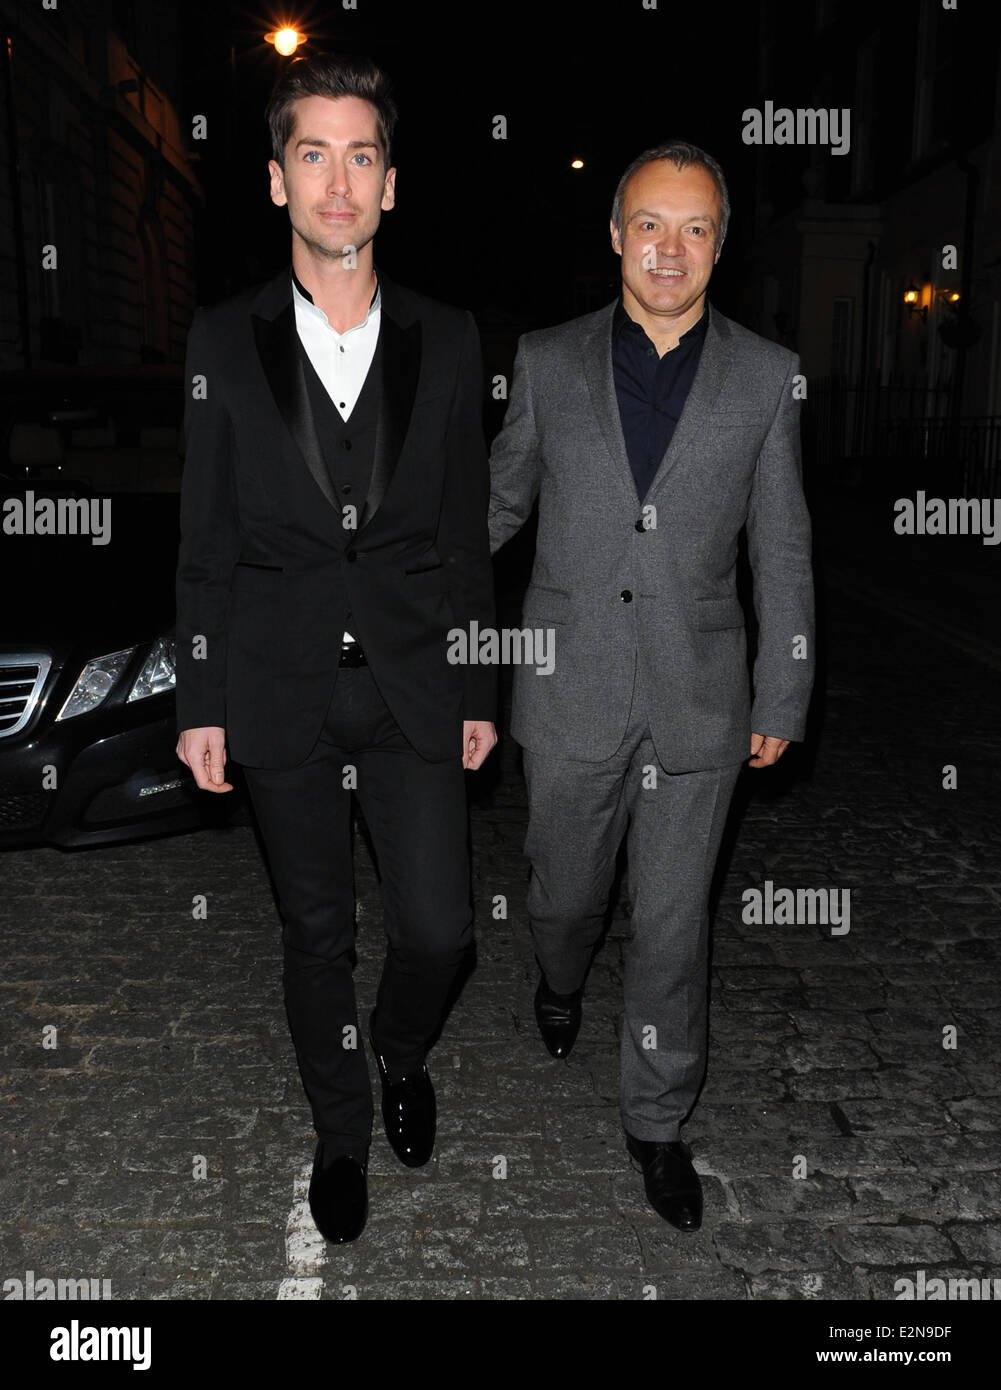 Celebrities seen leaving the Tom Ford party in Loulou's club Featuring:  Graham Norton,Trevor Patterson Where: London, England When: 09 Jan 2013  Stock Photo - Alamy